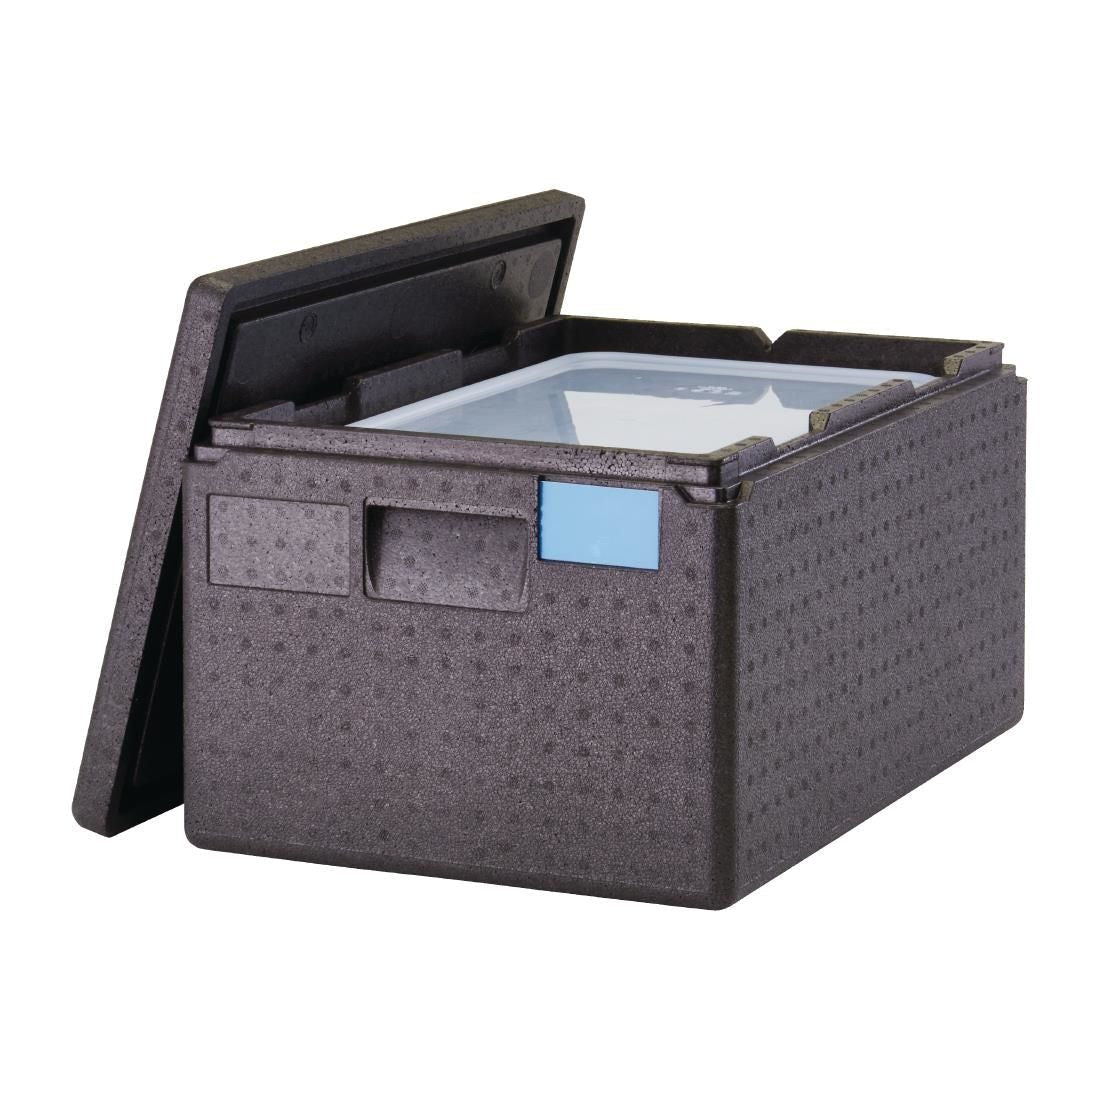 Cambro Insulated Top Loading Food Pan Carrier 43 Litre with 1/1 GN Pan and Lid JD Catering Equipment Solutions Ltd